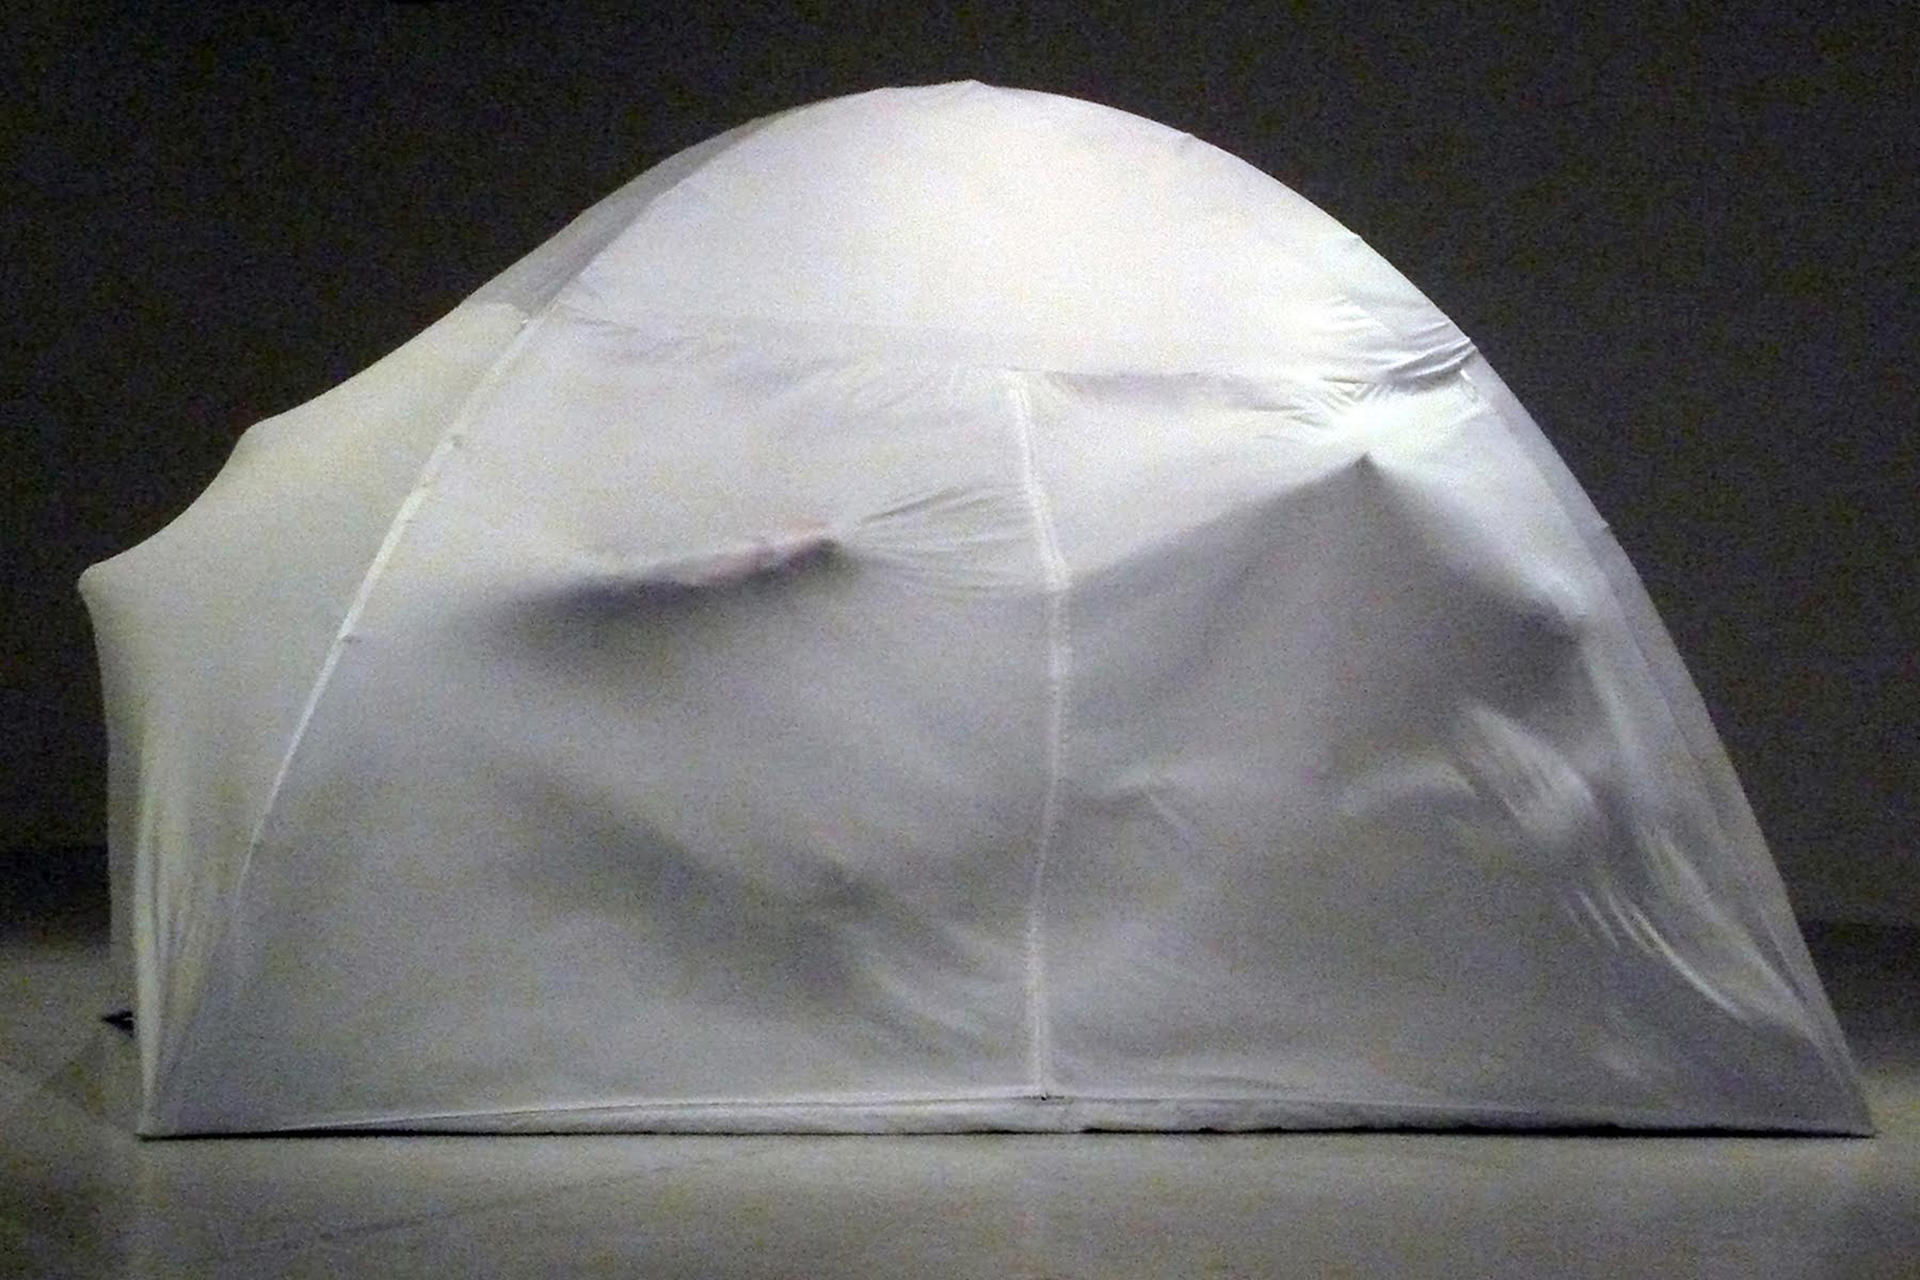 Tent, quartet, bows and elbows, 2007, Video still Courtesy of Ana Prvački and 1301PE